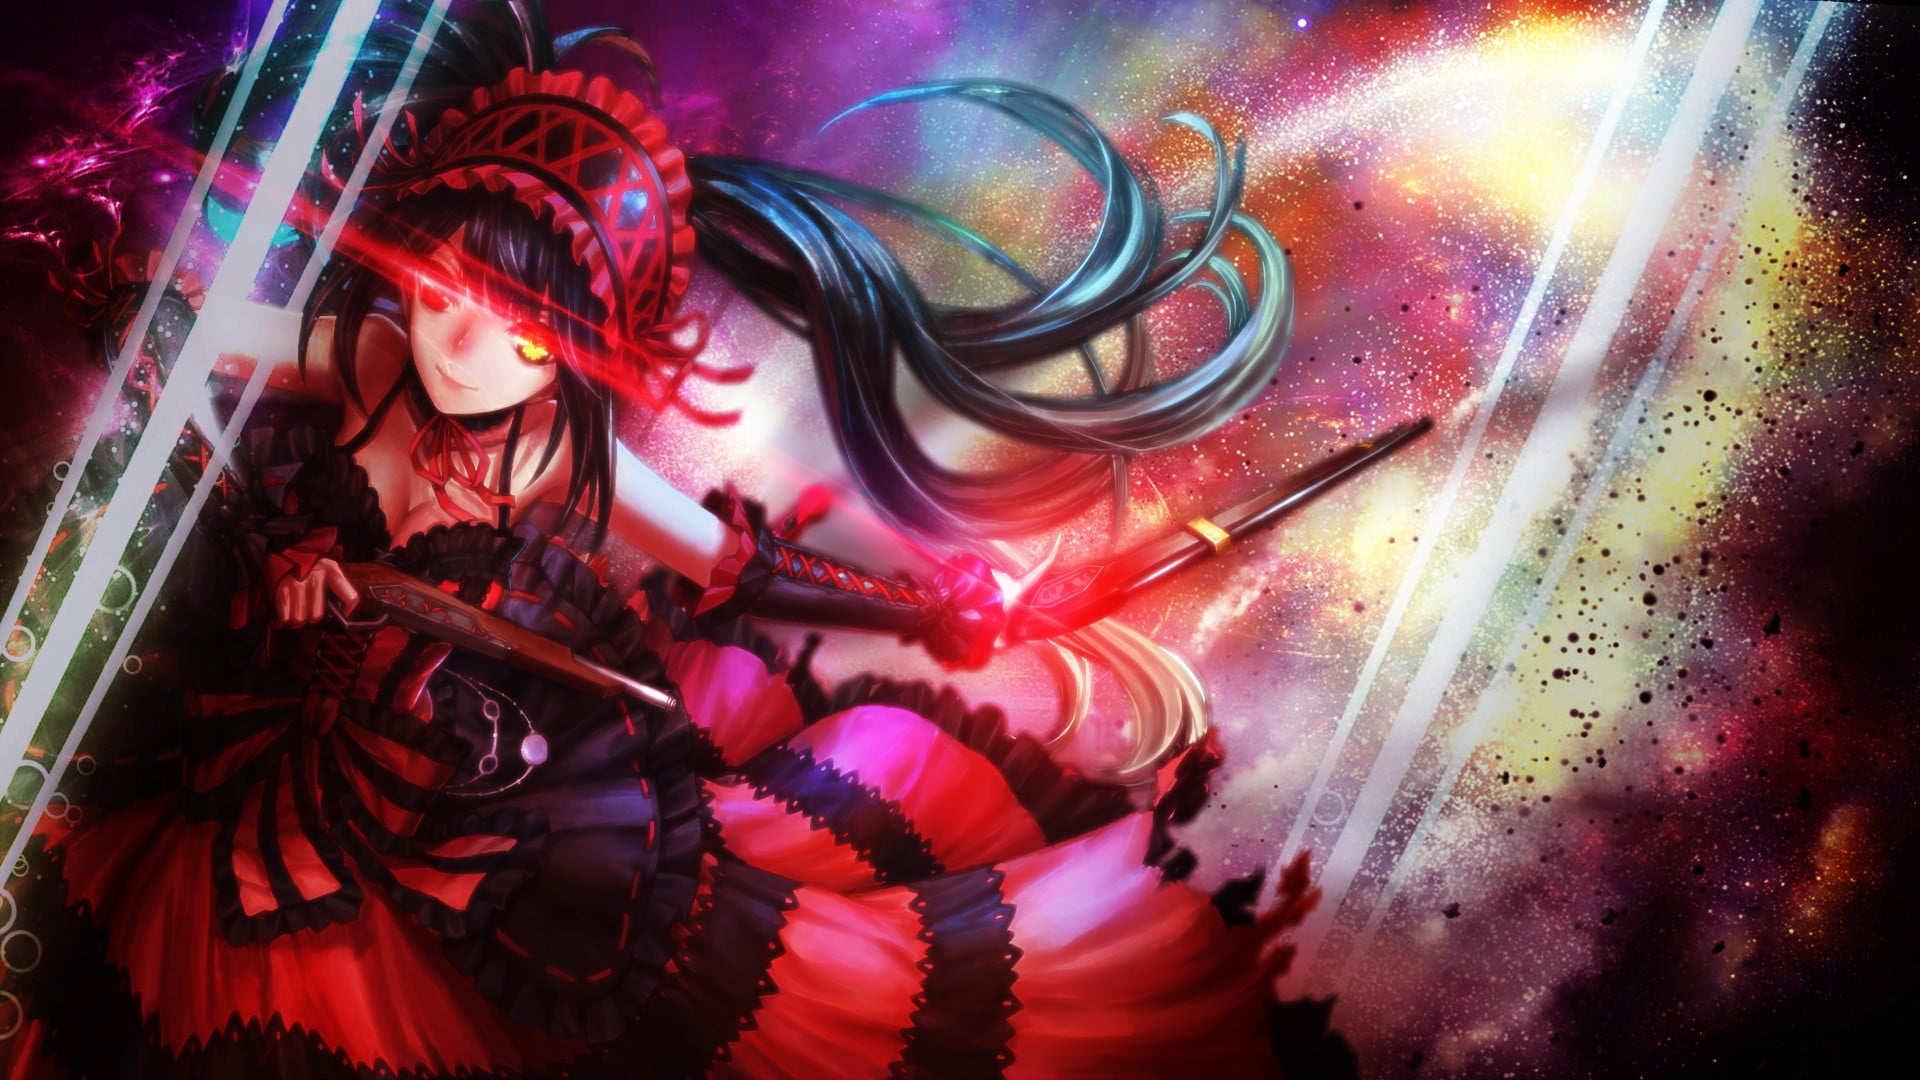 female anime character with red headband digital wallpaper